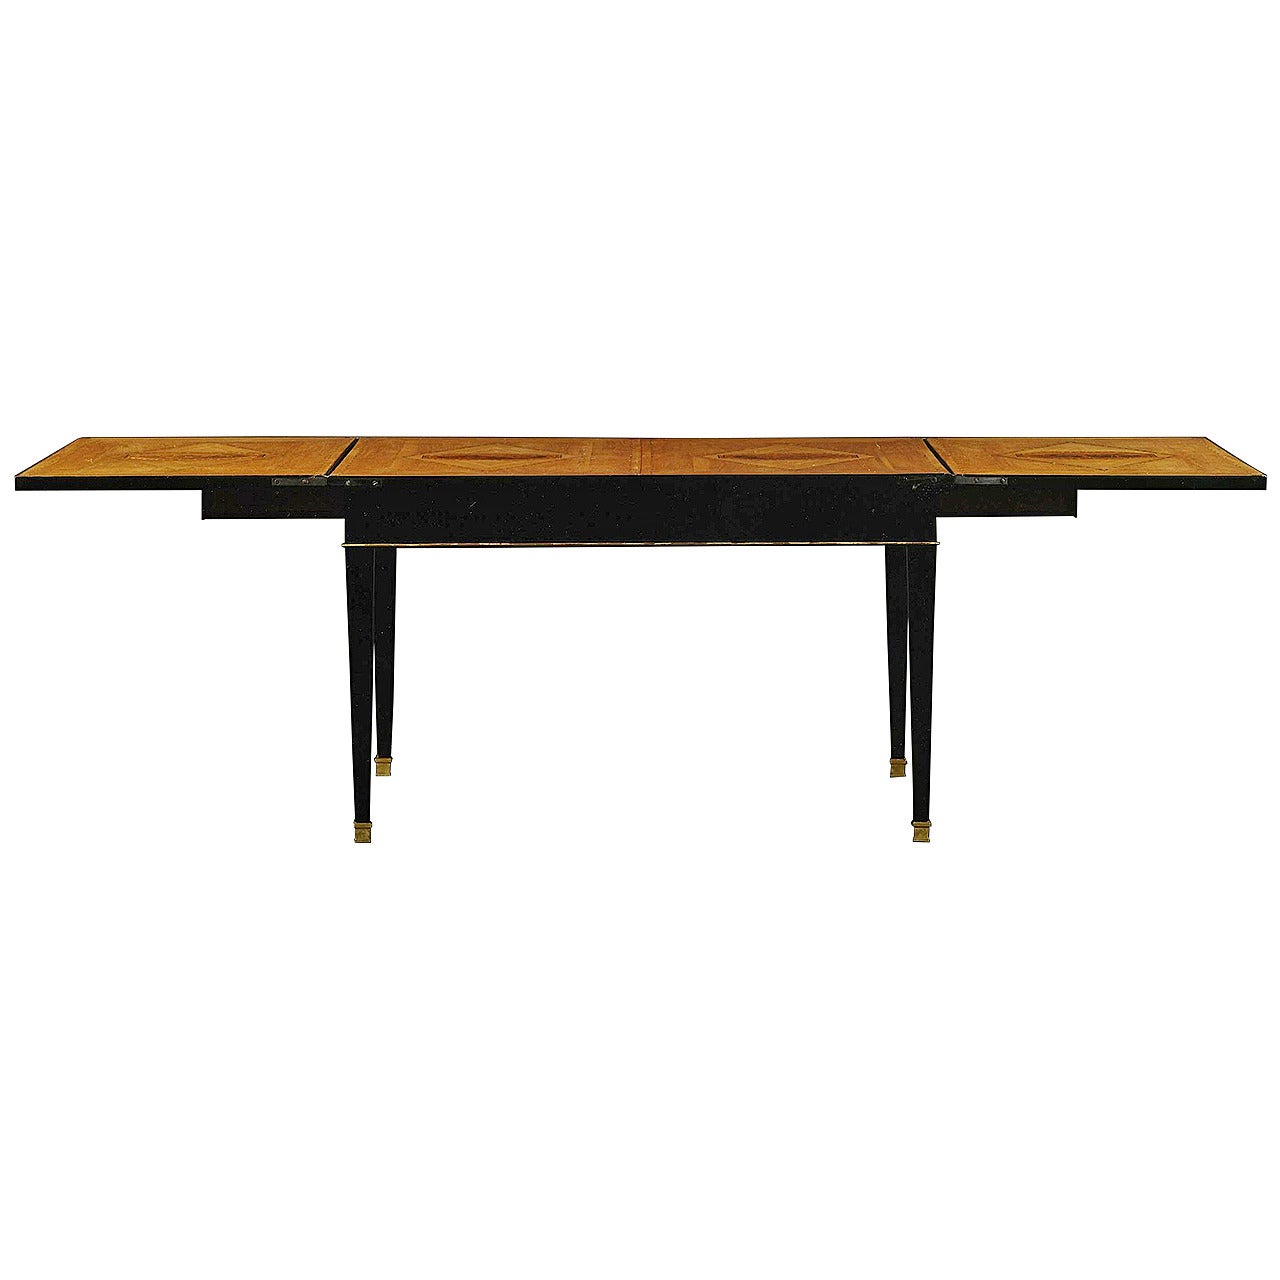 Unusual Ebonised and Cherry Wood Extending Table Attributed to J.G. Hiltl For Sale